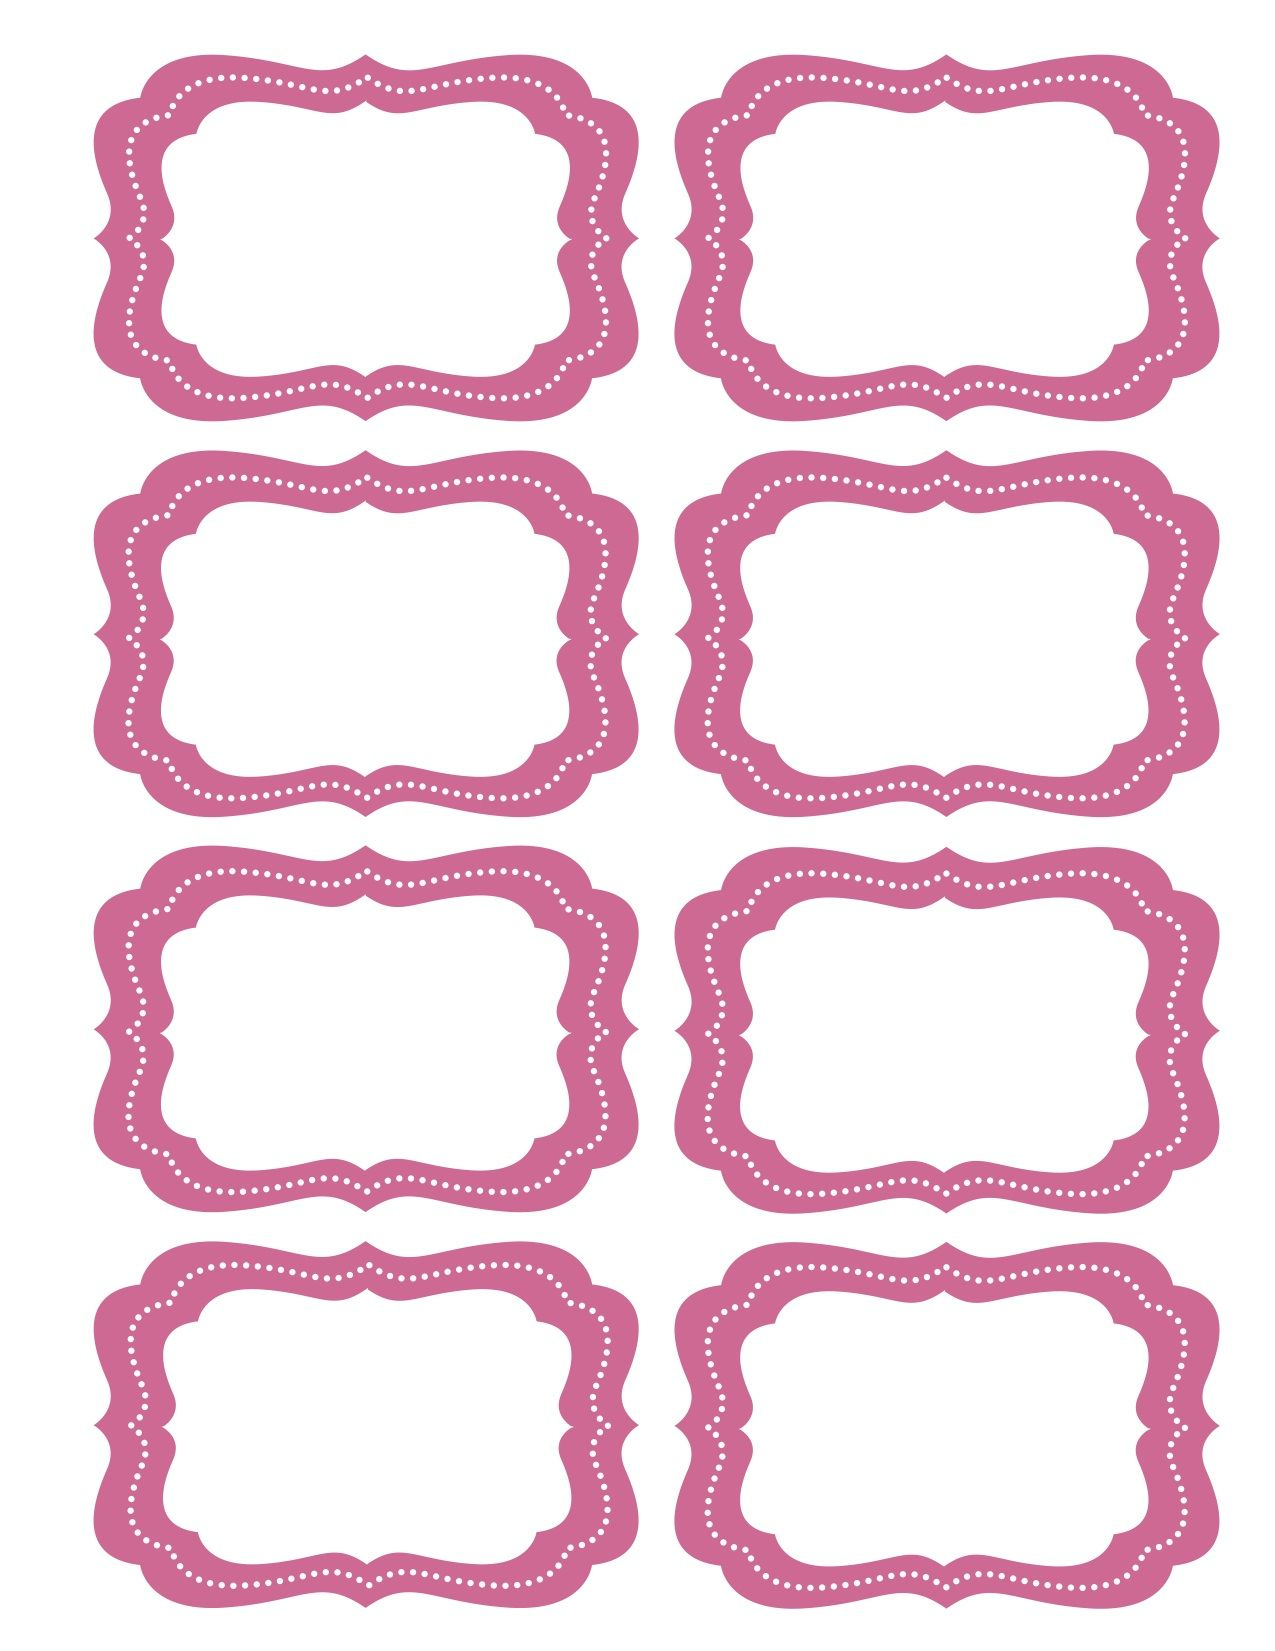 Free Printable Bag Label Templates | Candy Labels Blank Image - Fancy Labels Printable Free